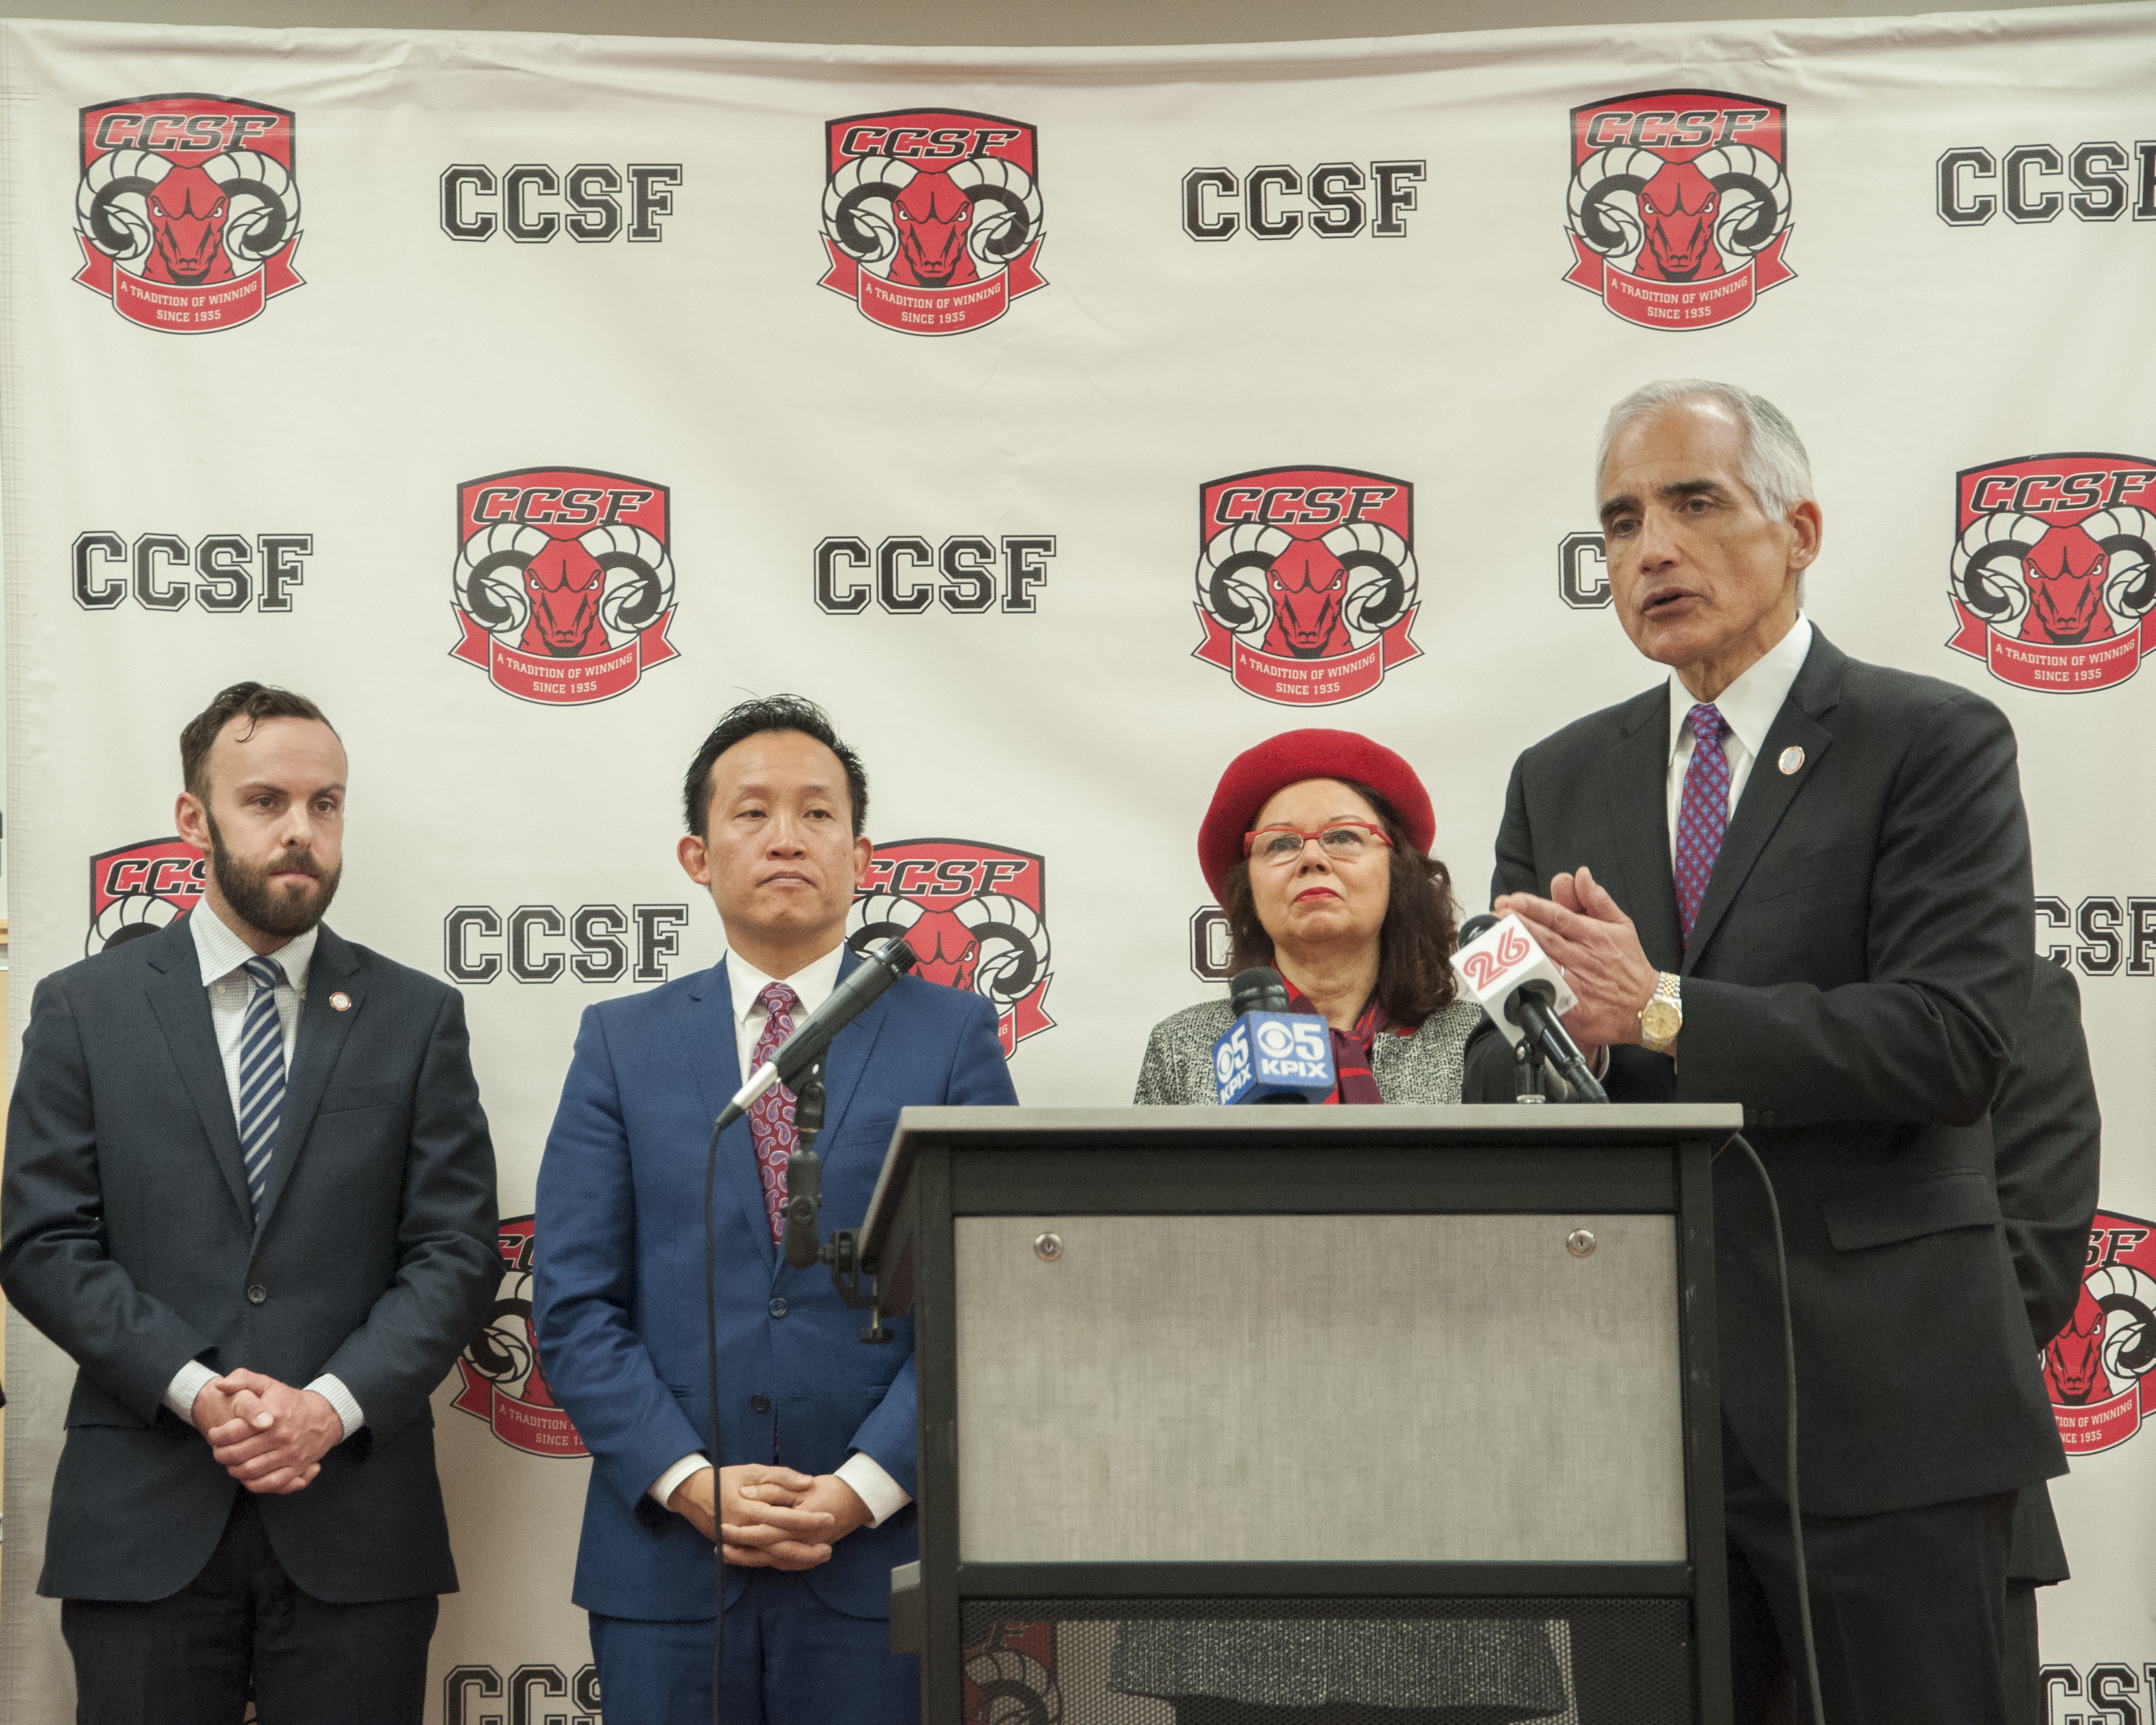 Chancellor Mark Rocha (right) urges students to apply for the California Dream Act before the deadline during a press conference at Mission Campus on Wednesday, Feb. 28, 2018, with Trustee Tom Temprano (left to right), Assemblyman David Chiu and Trustee Brigitte Davila. Photo by Janeth R. Sanchez/The Guardsman. 